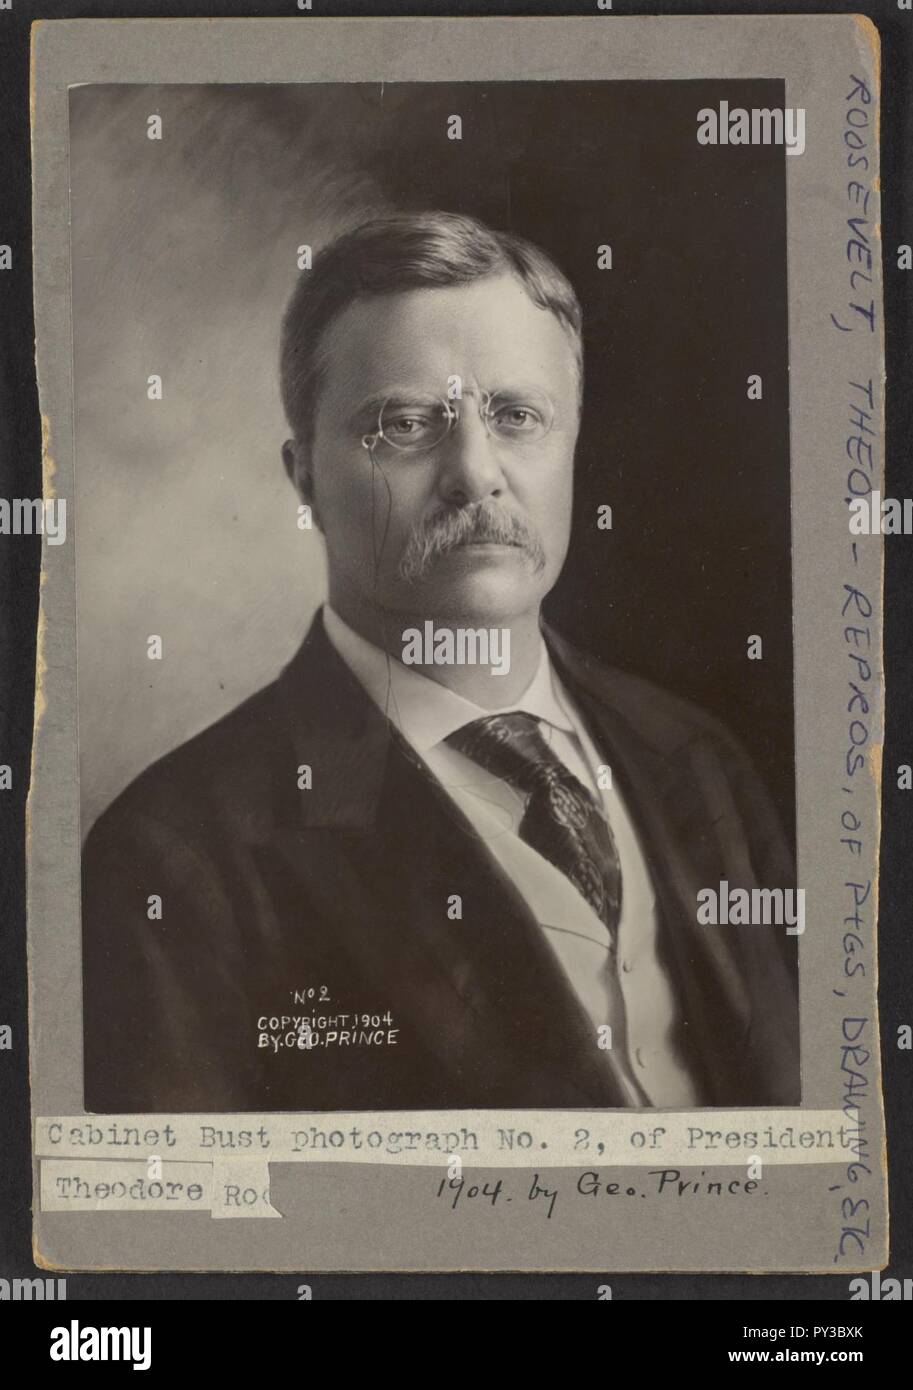 Cabinet Bust Photograph No 2 Of President Theodore Roosevelt